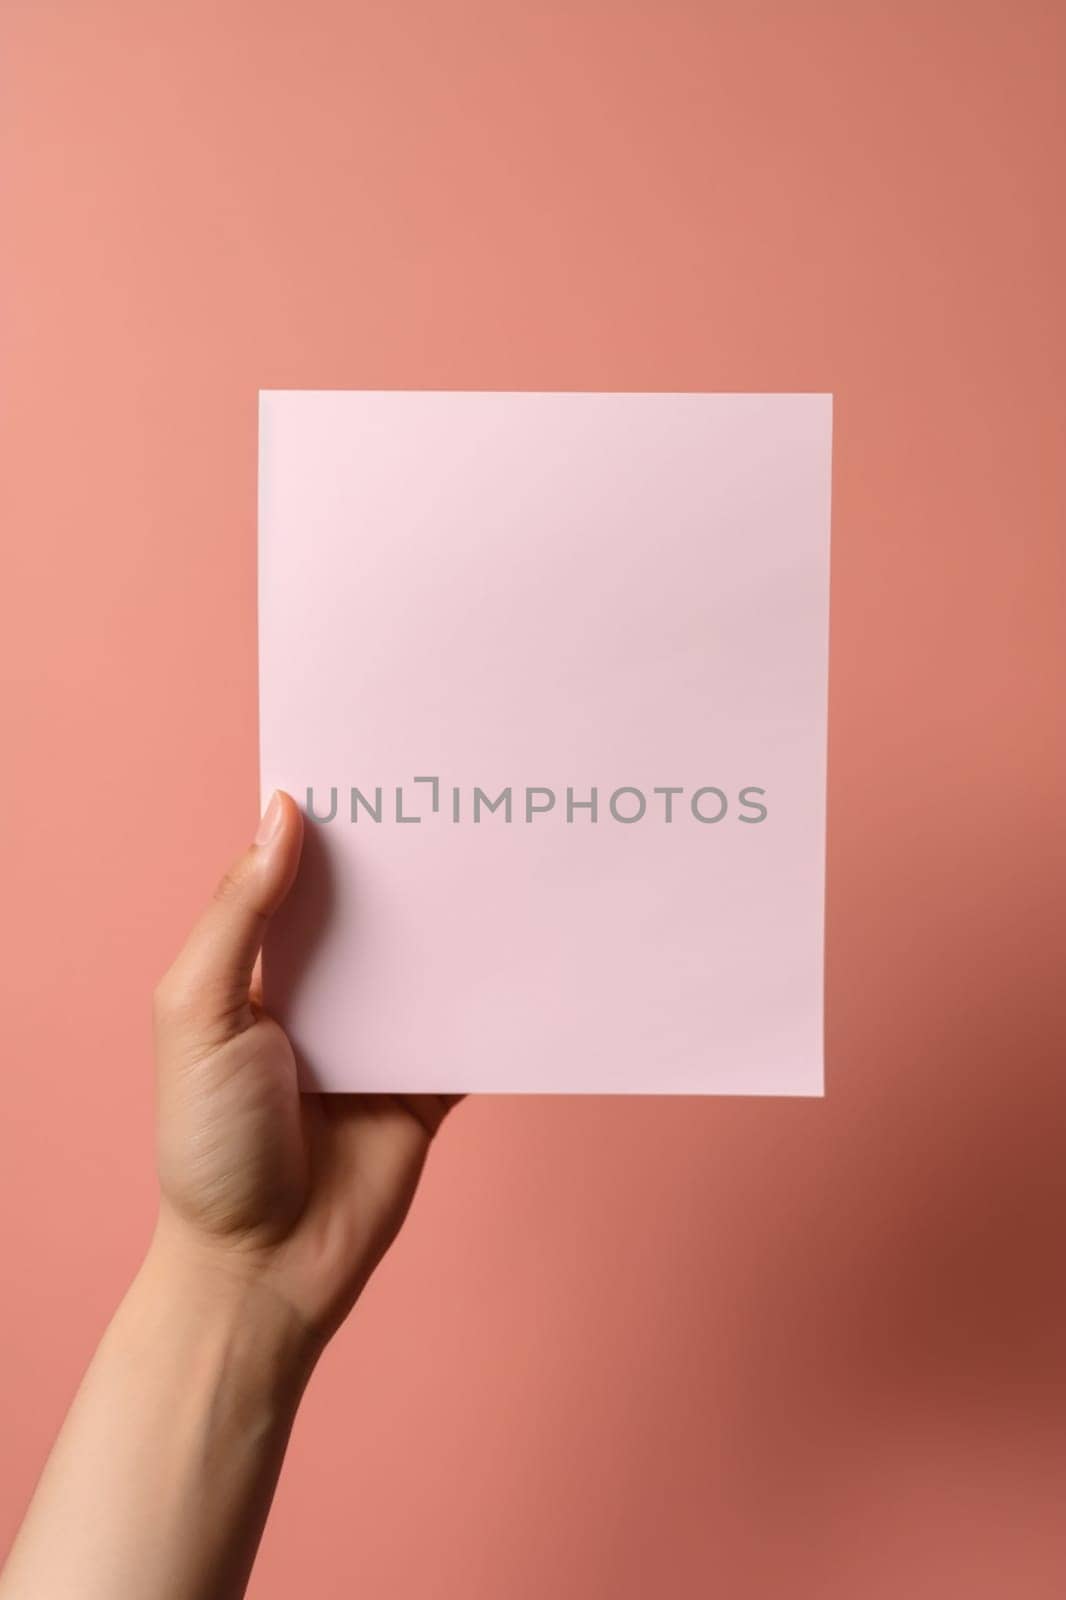 A mock up with a hand holding a blank pink square paper against a pink background. by Hype2art